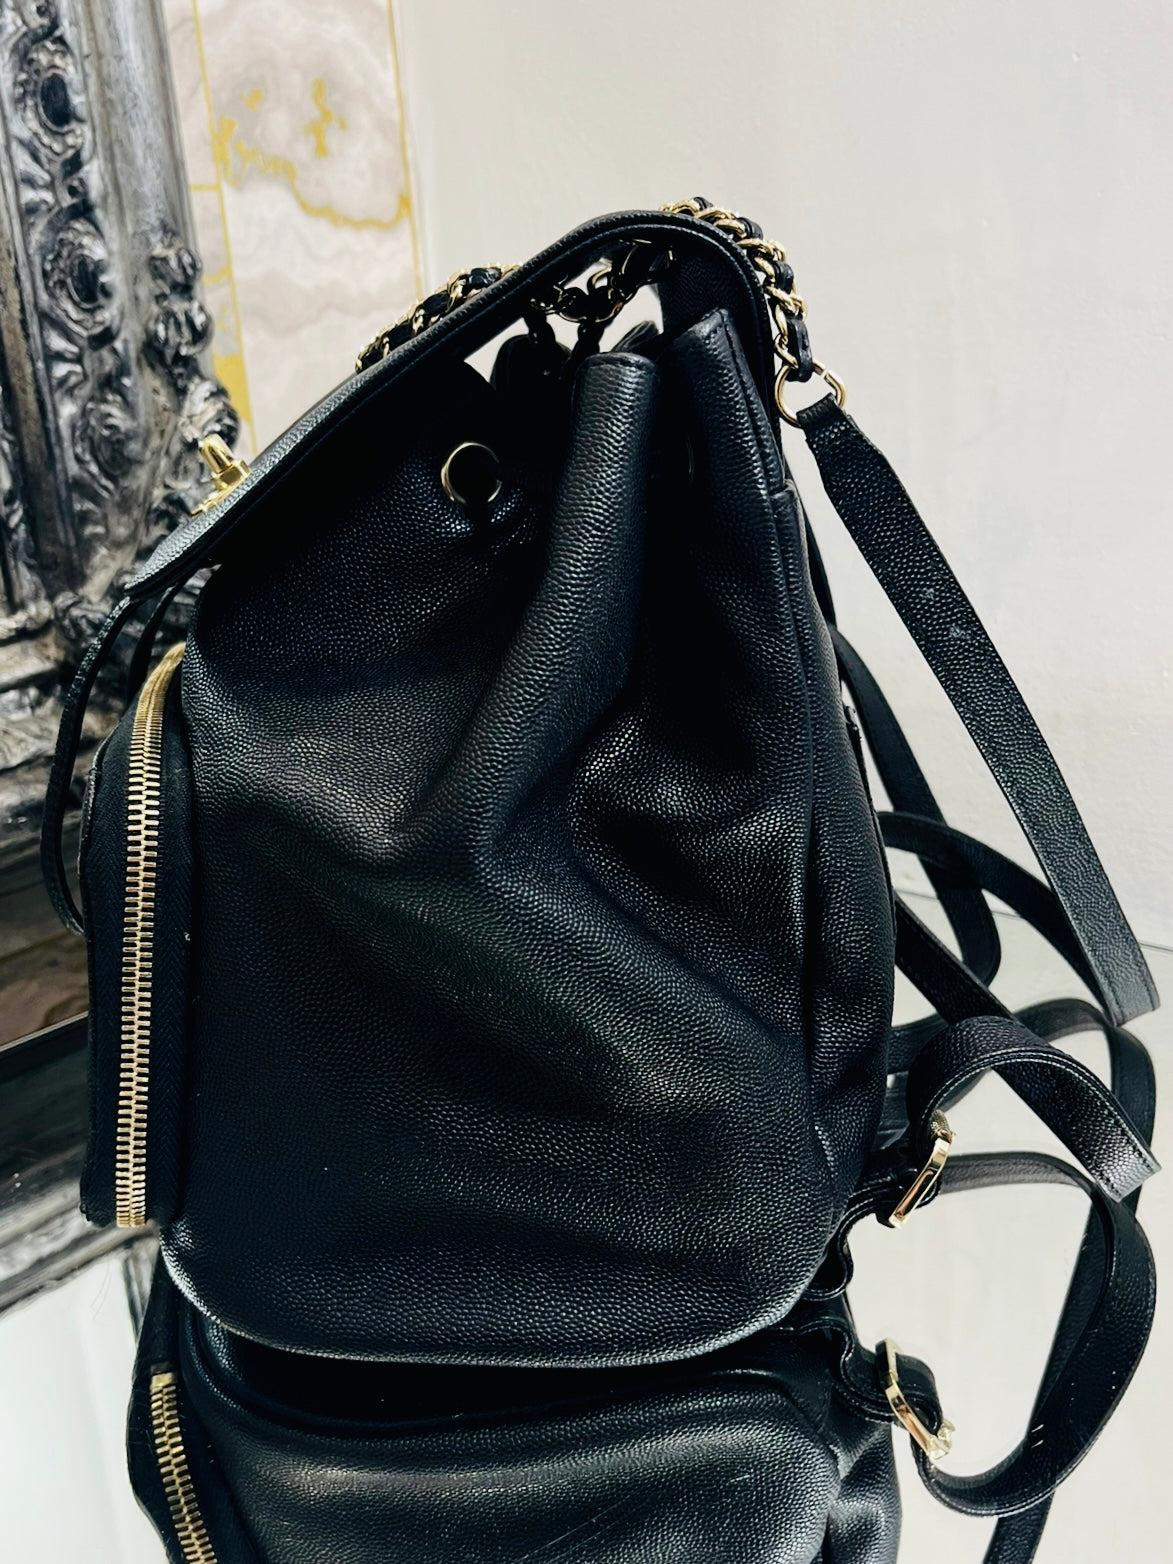 Chanel Affinity Caviar Leather Backpack In Excellent Condition For Sale In London, GB